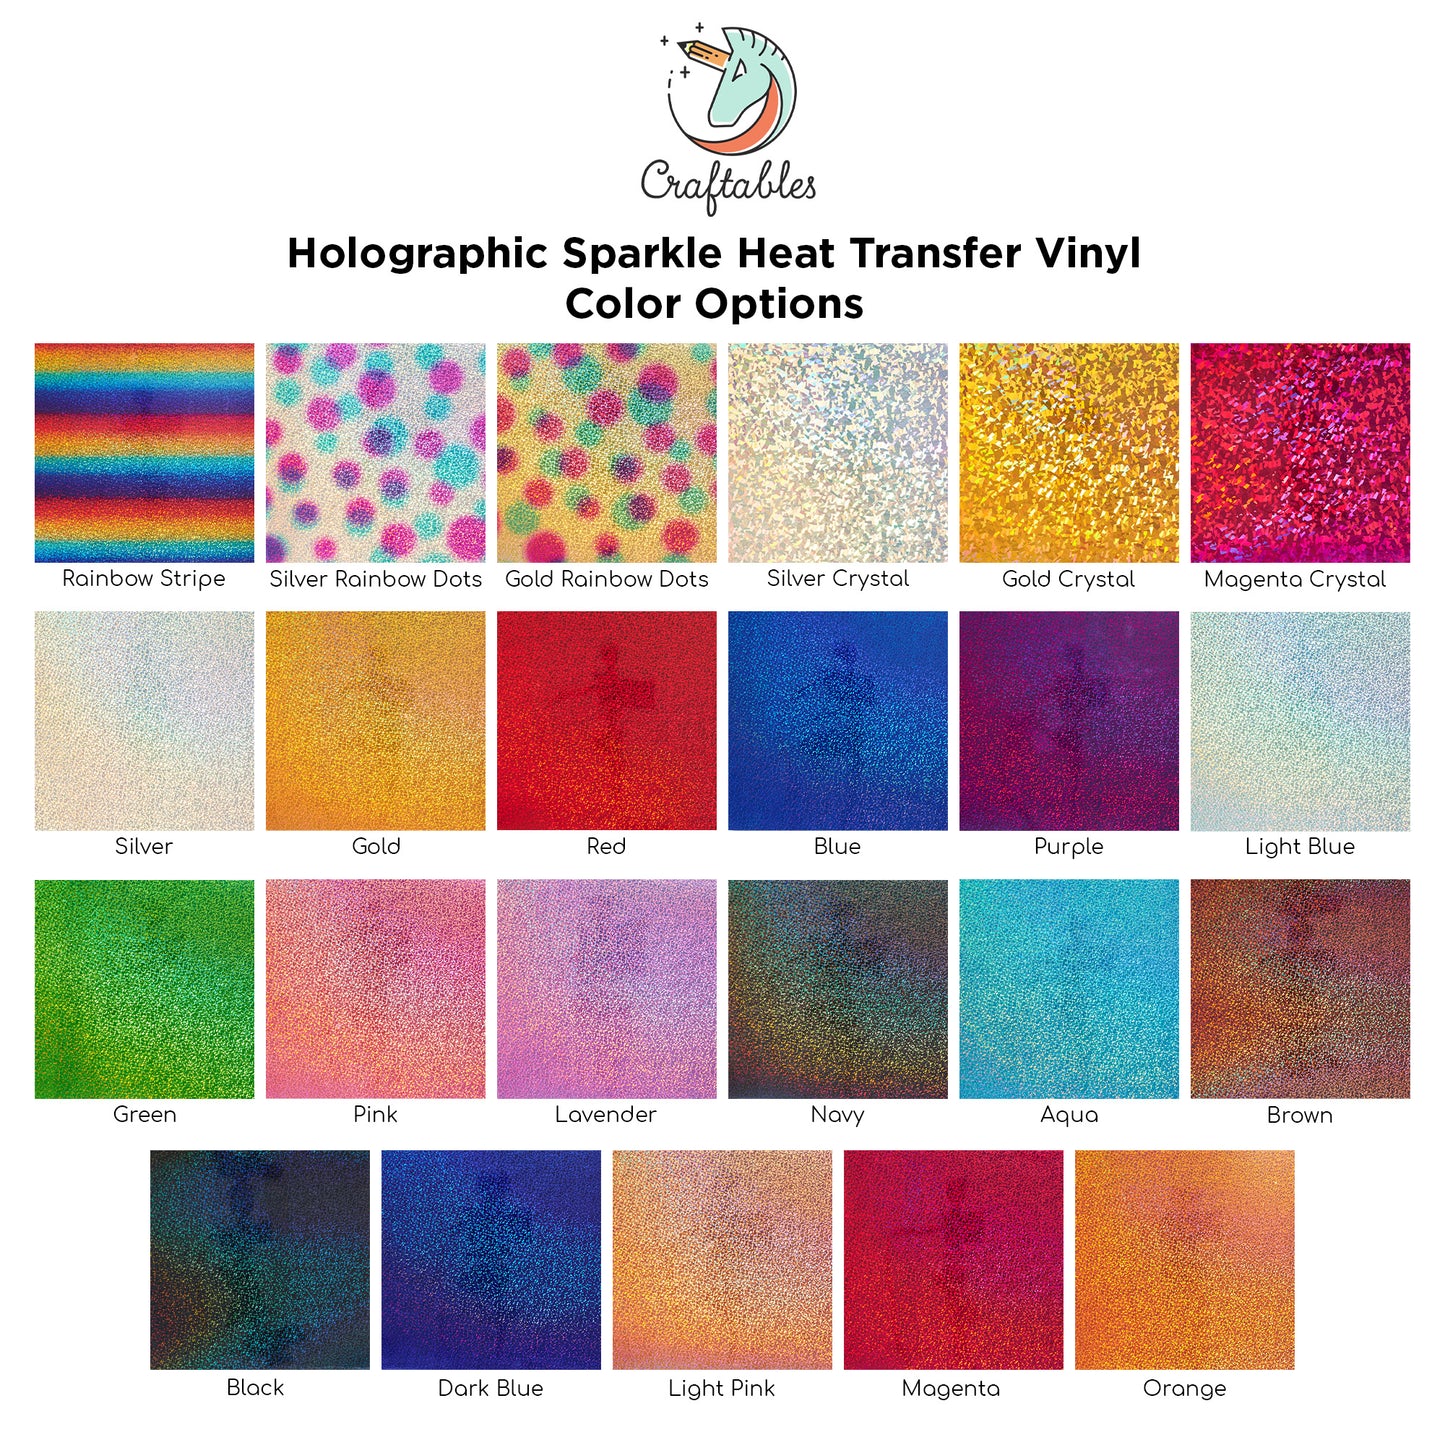 Orange Holographic Sparkle Heat Transfer Vinyl Sheets By Craftables